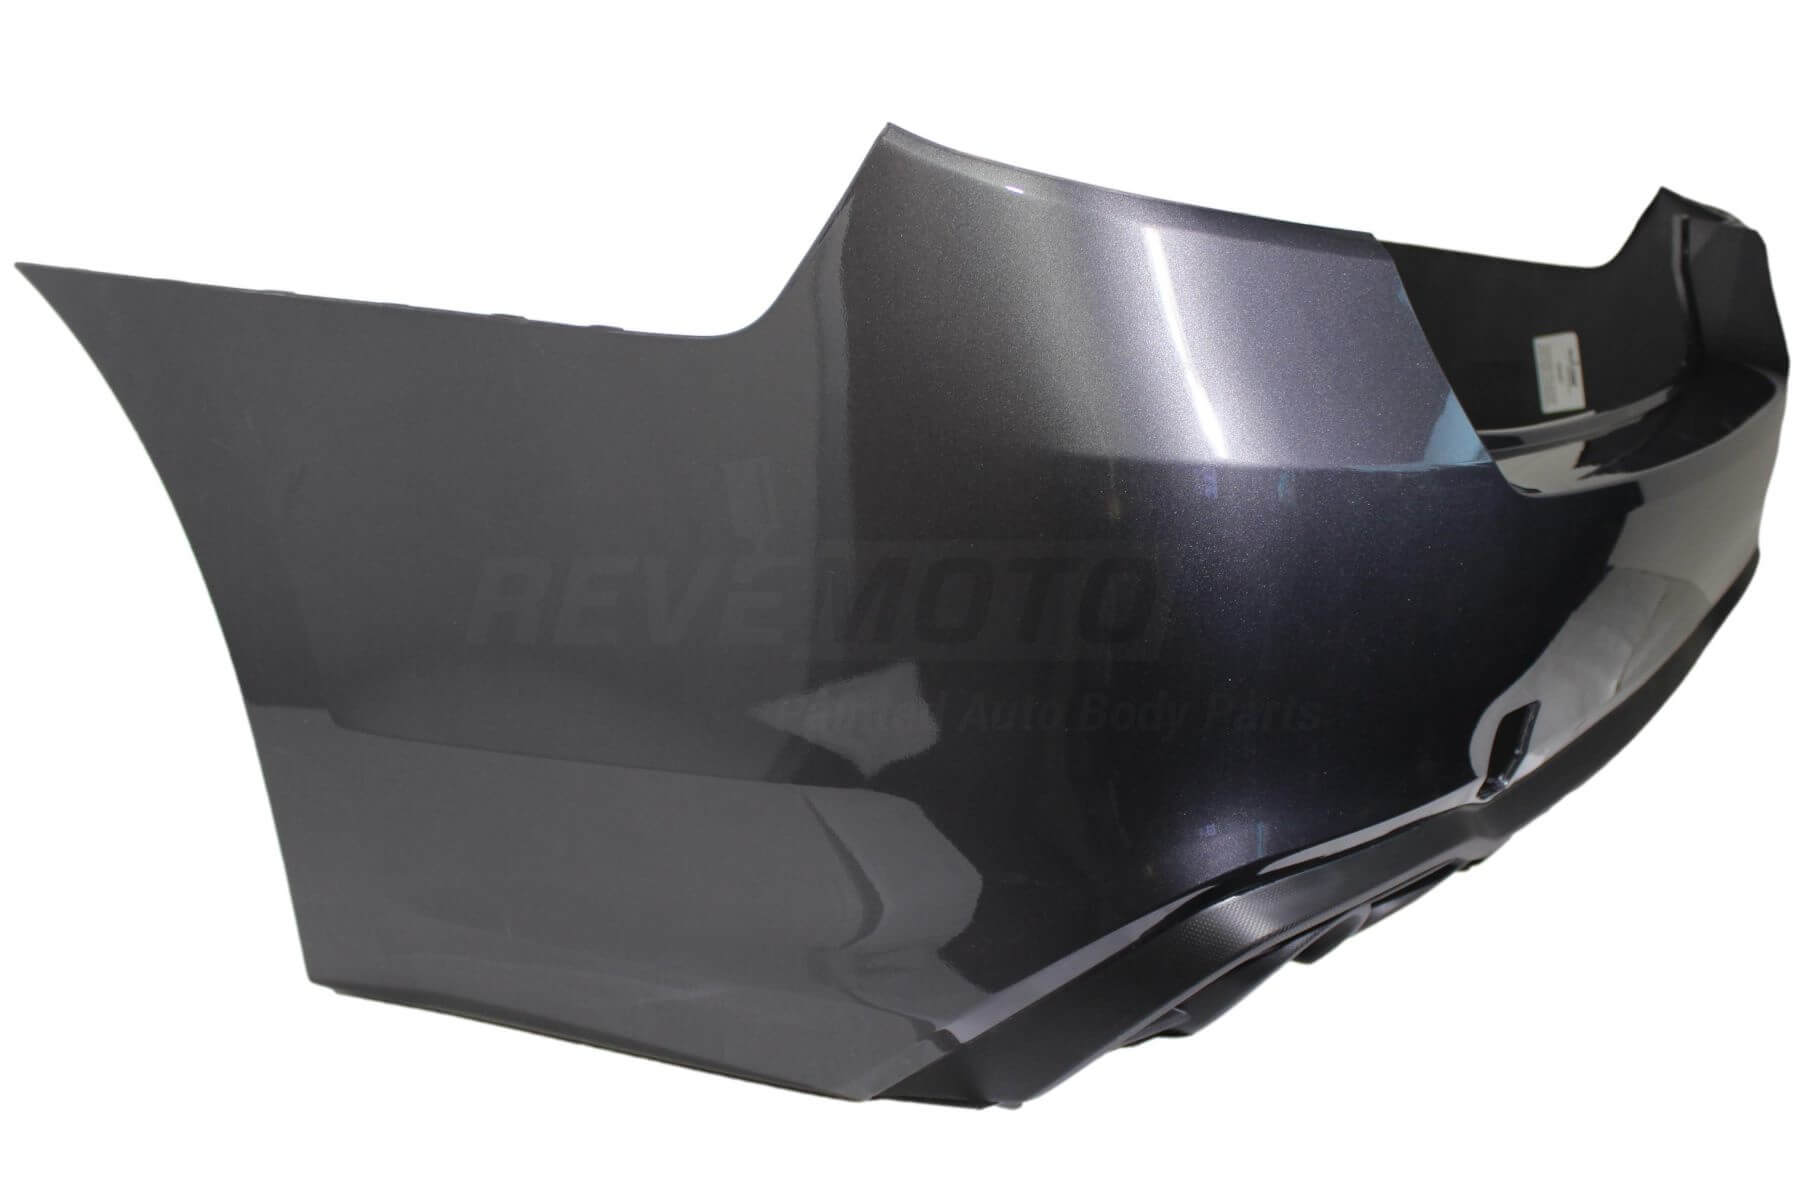 2018-2019 Subaru Legacy Rear Bumper Painted Magnetite Gray Metallic (MG2) Without Park Assist Holes - Side View - ReveMoto